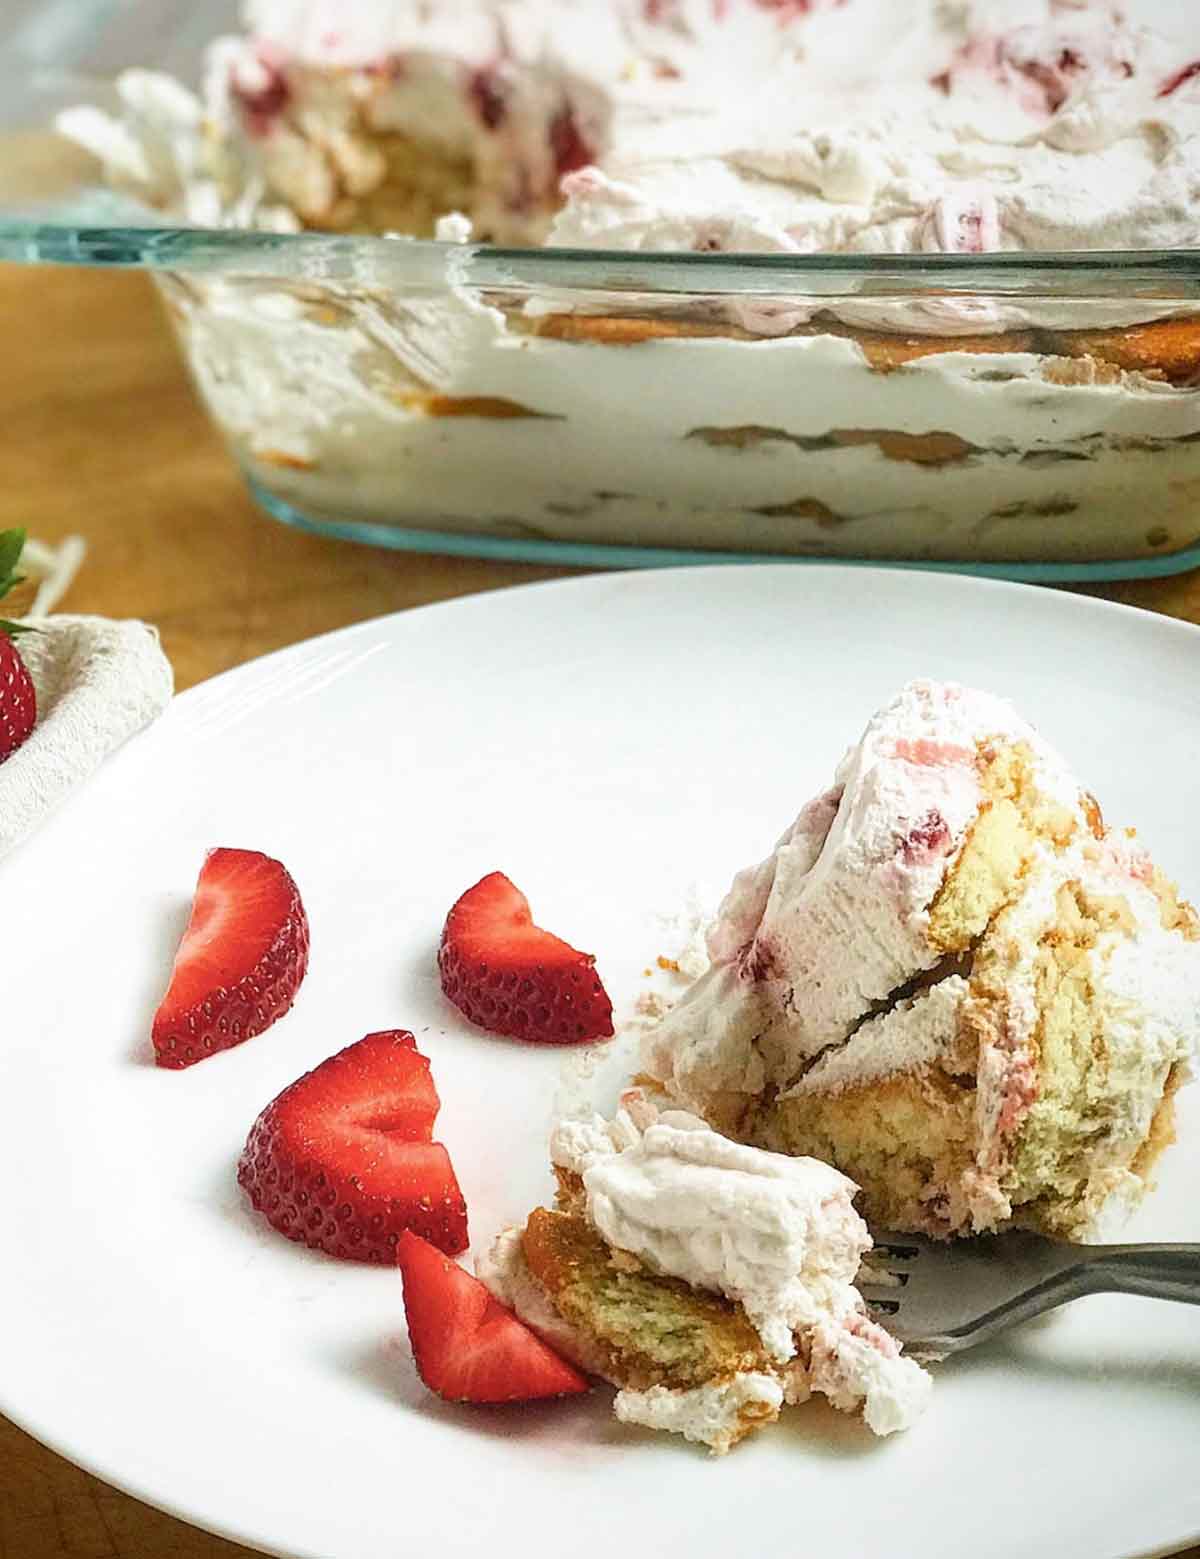 A scoop of Jessie Sheehan's easy strawberry icebox cake on a white plate with sliced strawberries and a glass baking dish with the rest of the cake beside it.